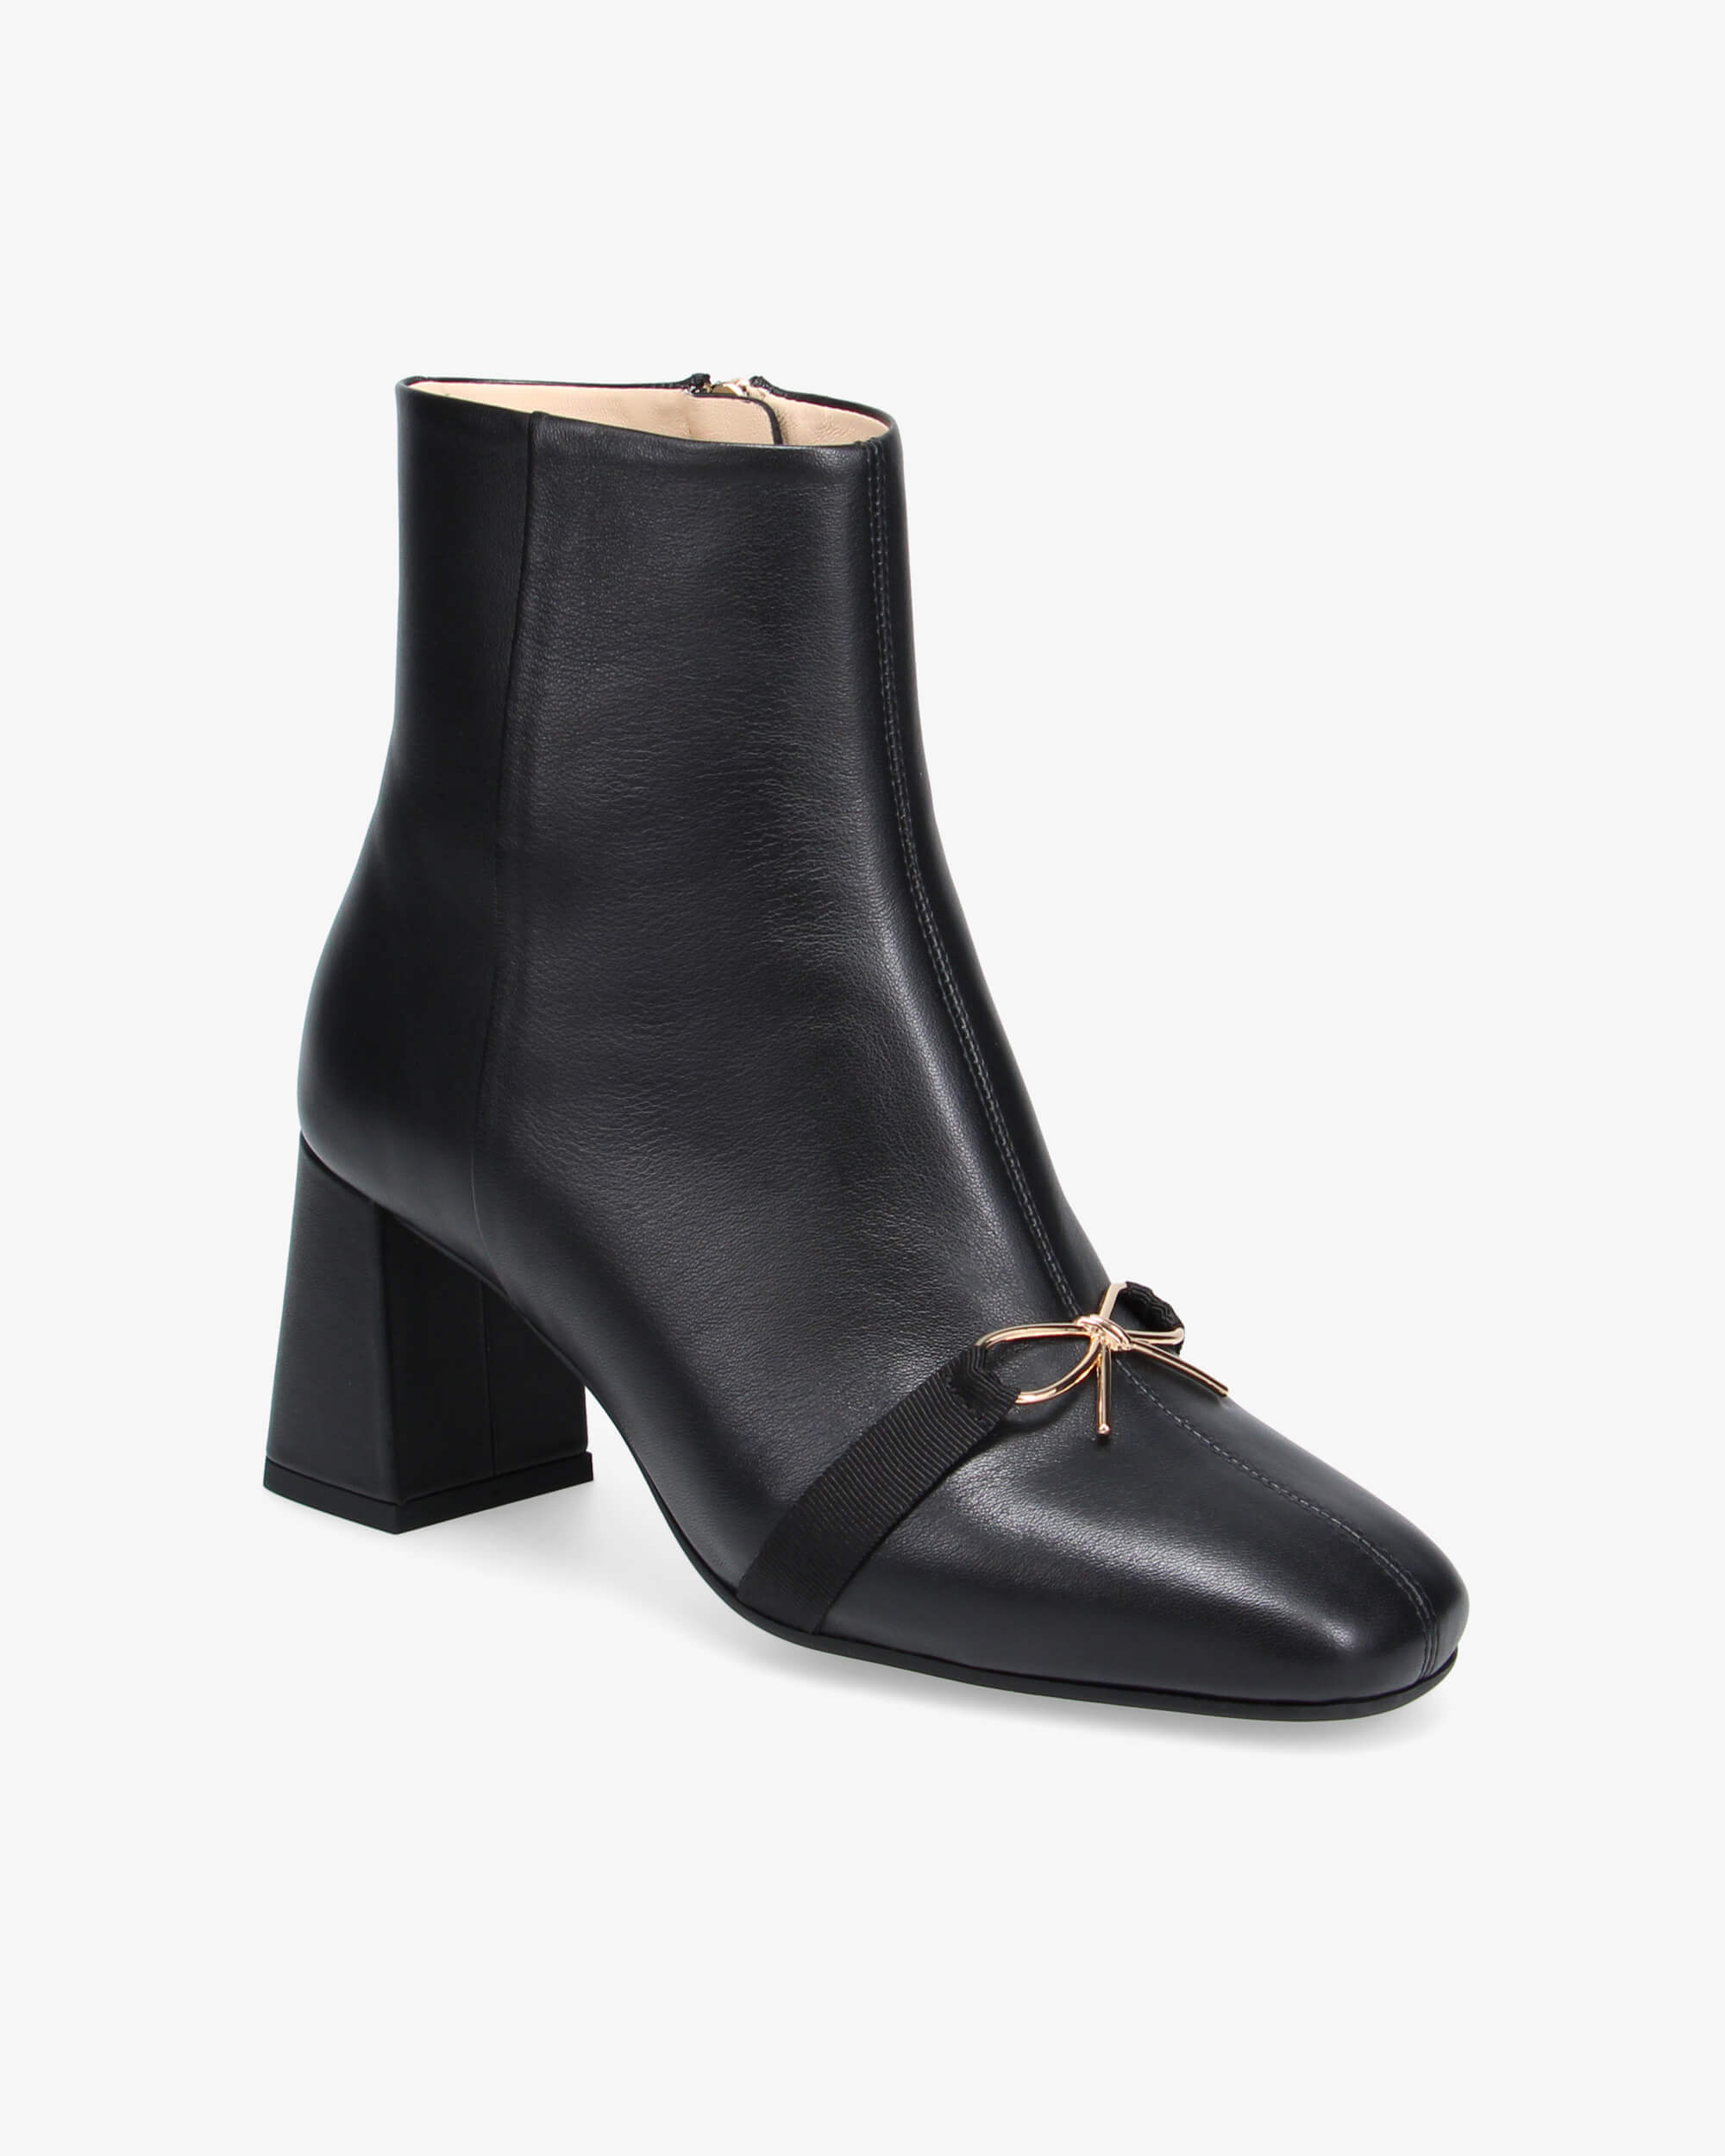 Phoebe metallic bow ankle boots